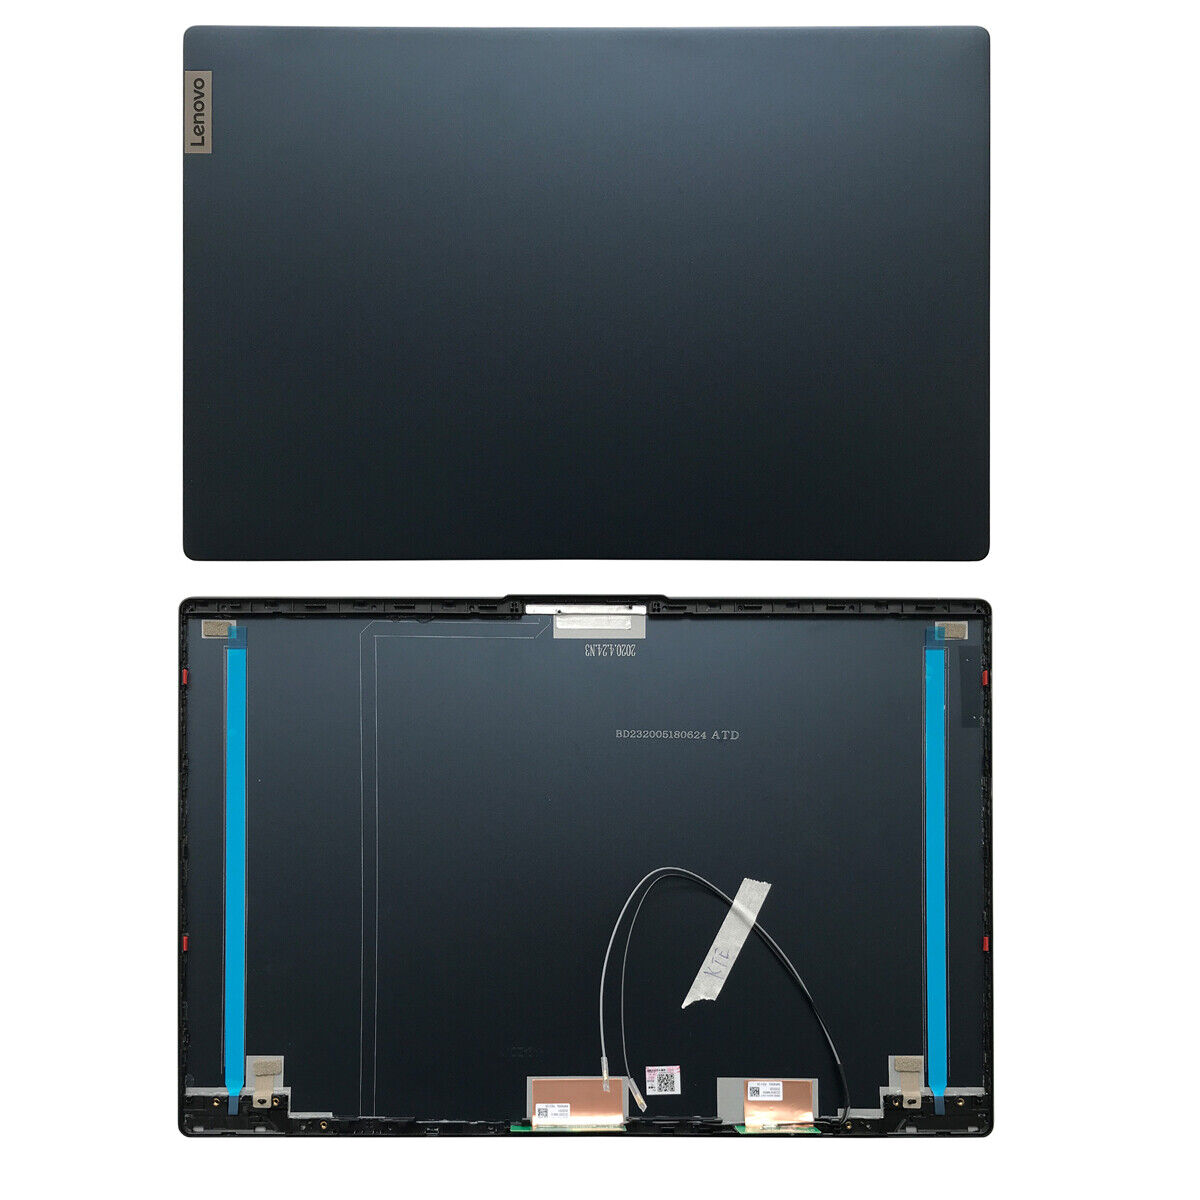 New LCD Back Cover/Bezel/Hinges For Lenovo Ideapad 5 15IIL05 15ITL05 15ARE05 US